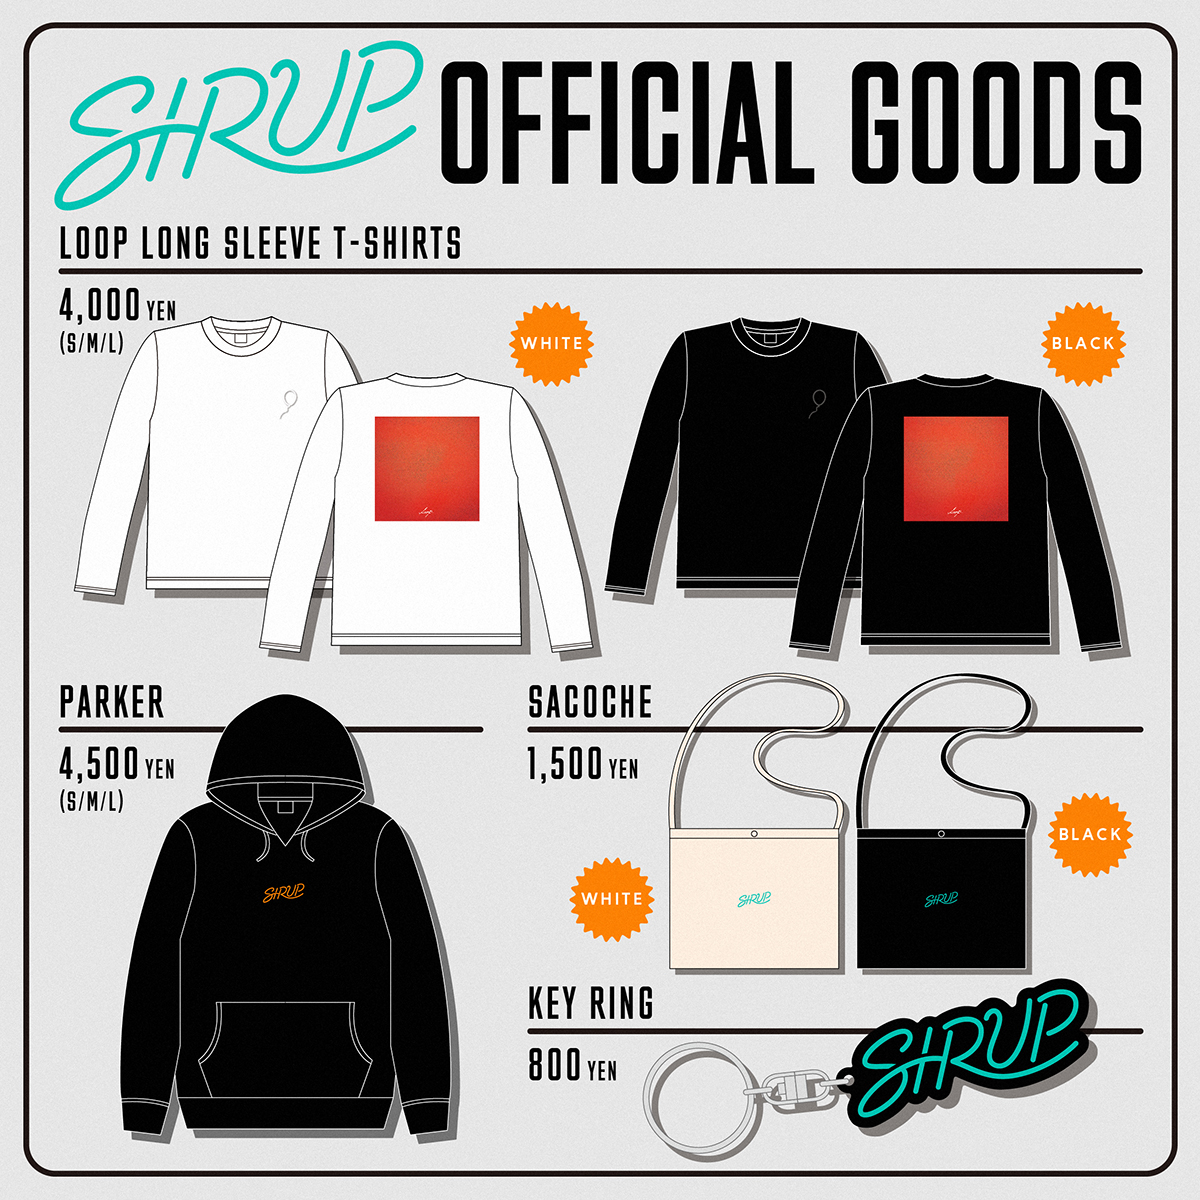 SIRUP NEW OFFICIAL GOODS ワンマンより順次発売！ - SIRUP 